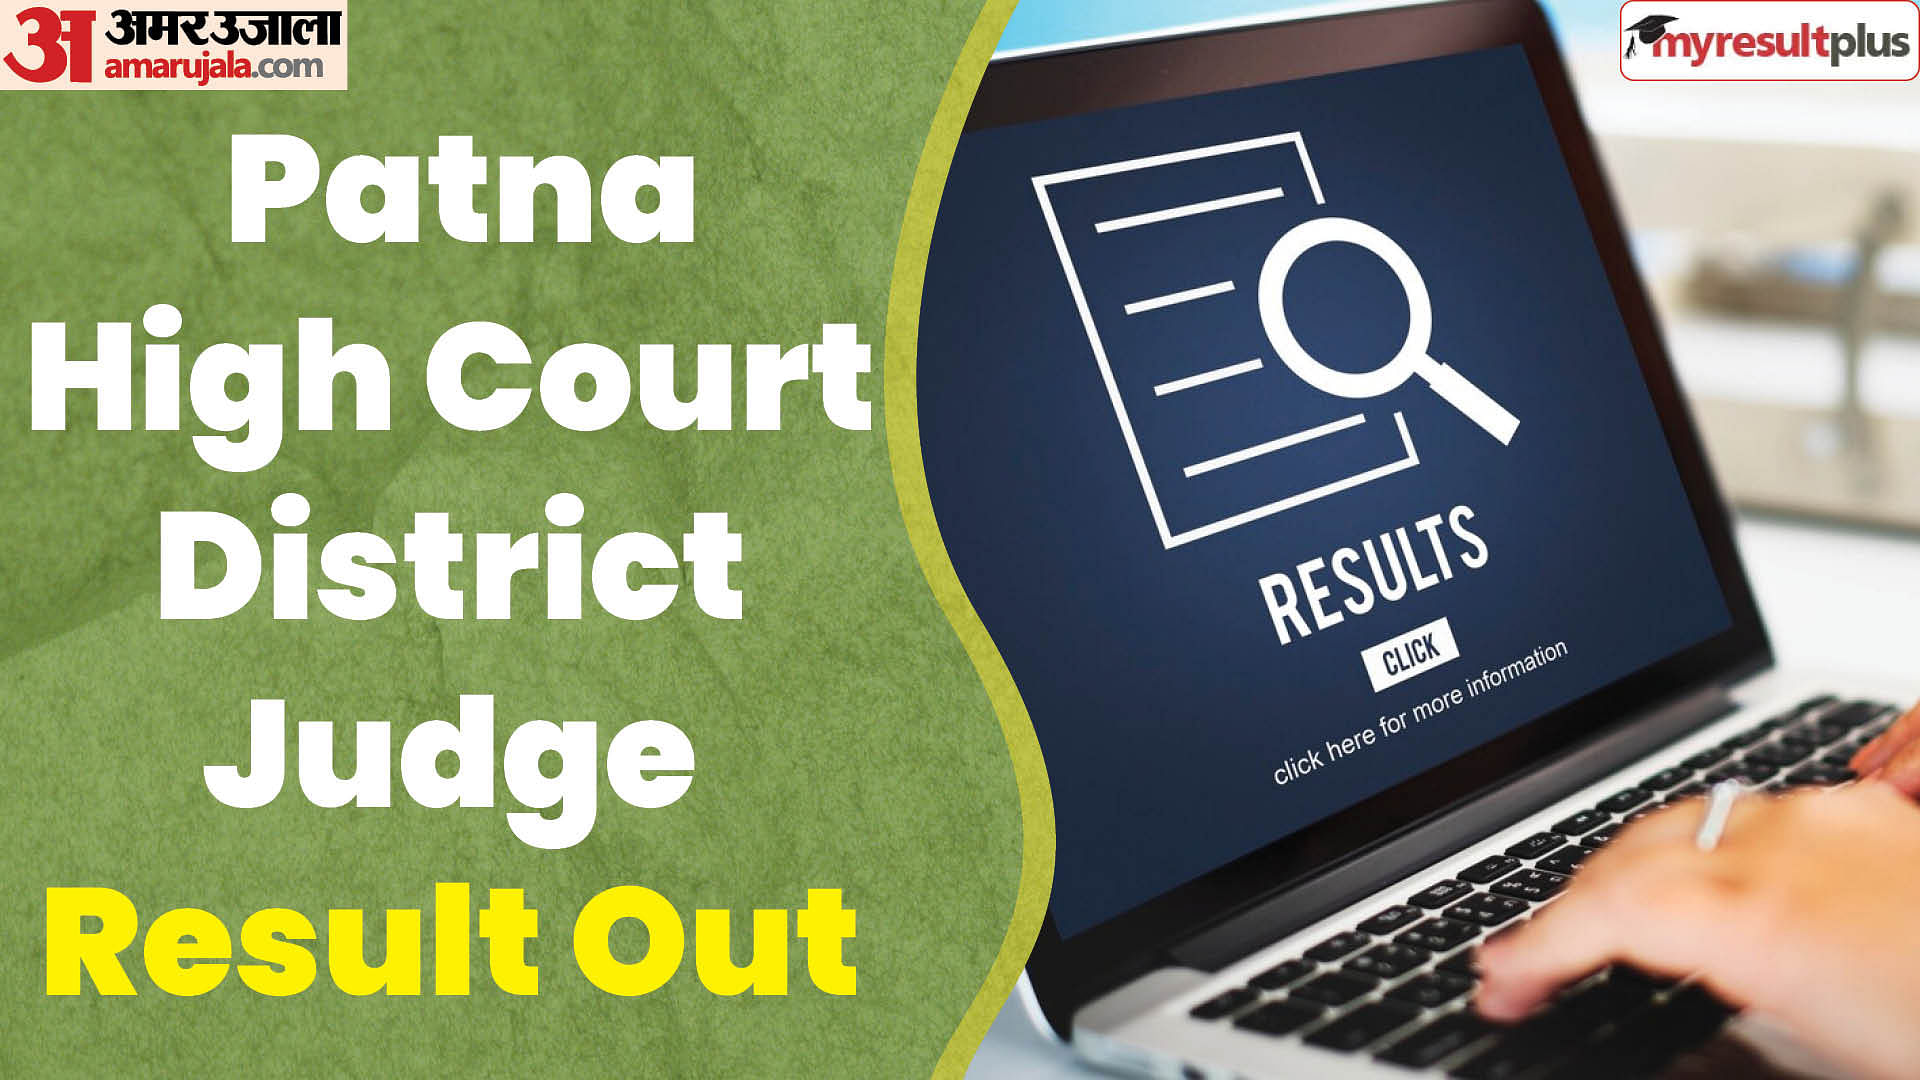 Patna High Court District Judge Result 2023 released at patnahighcourt.gov.in, Read more details here